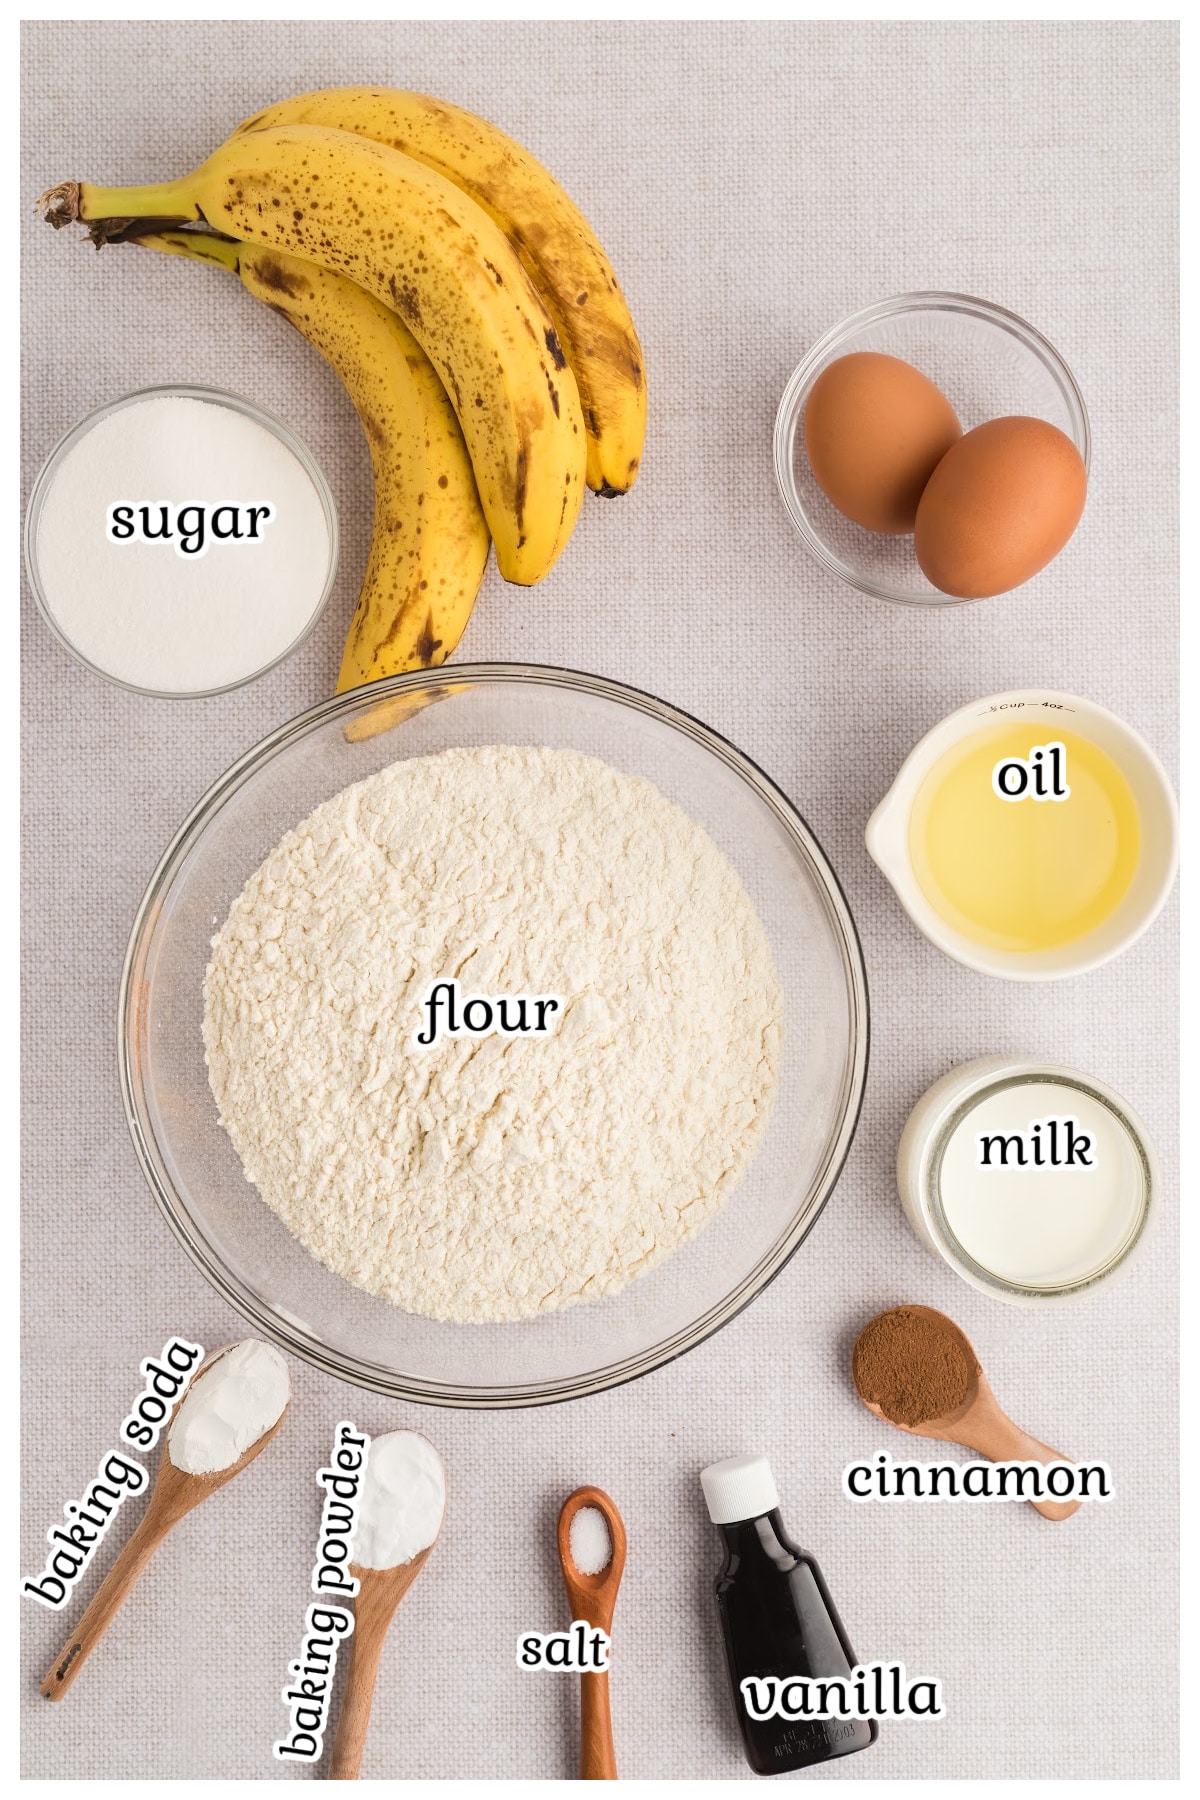 Ingredients for the banana bread on a surface.